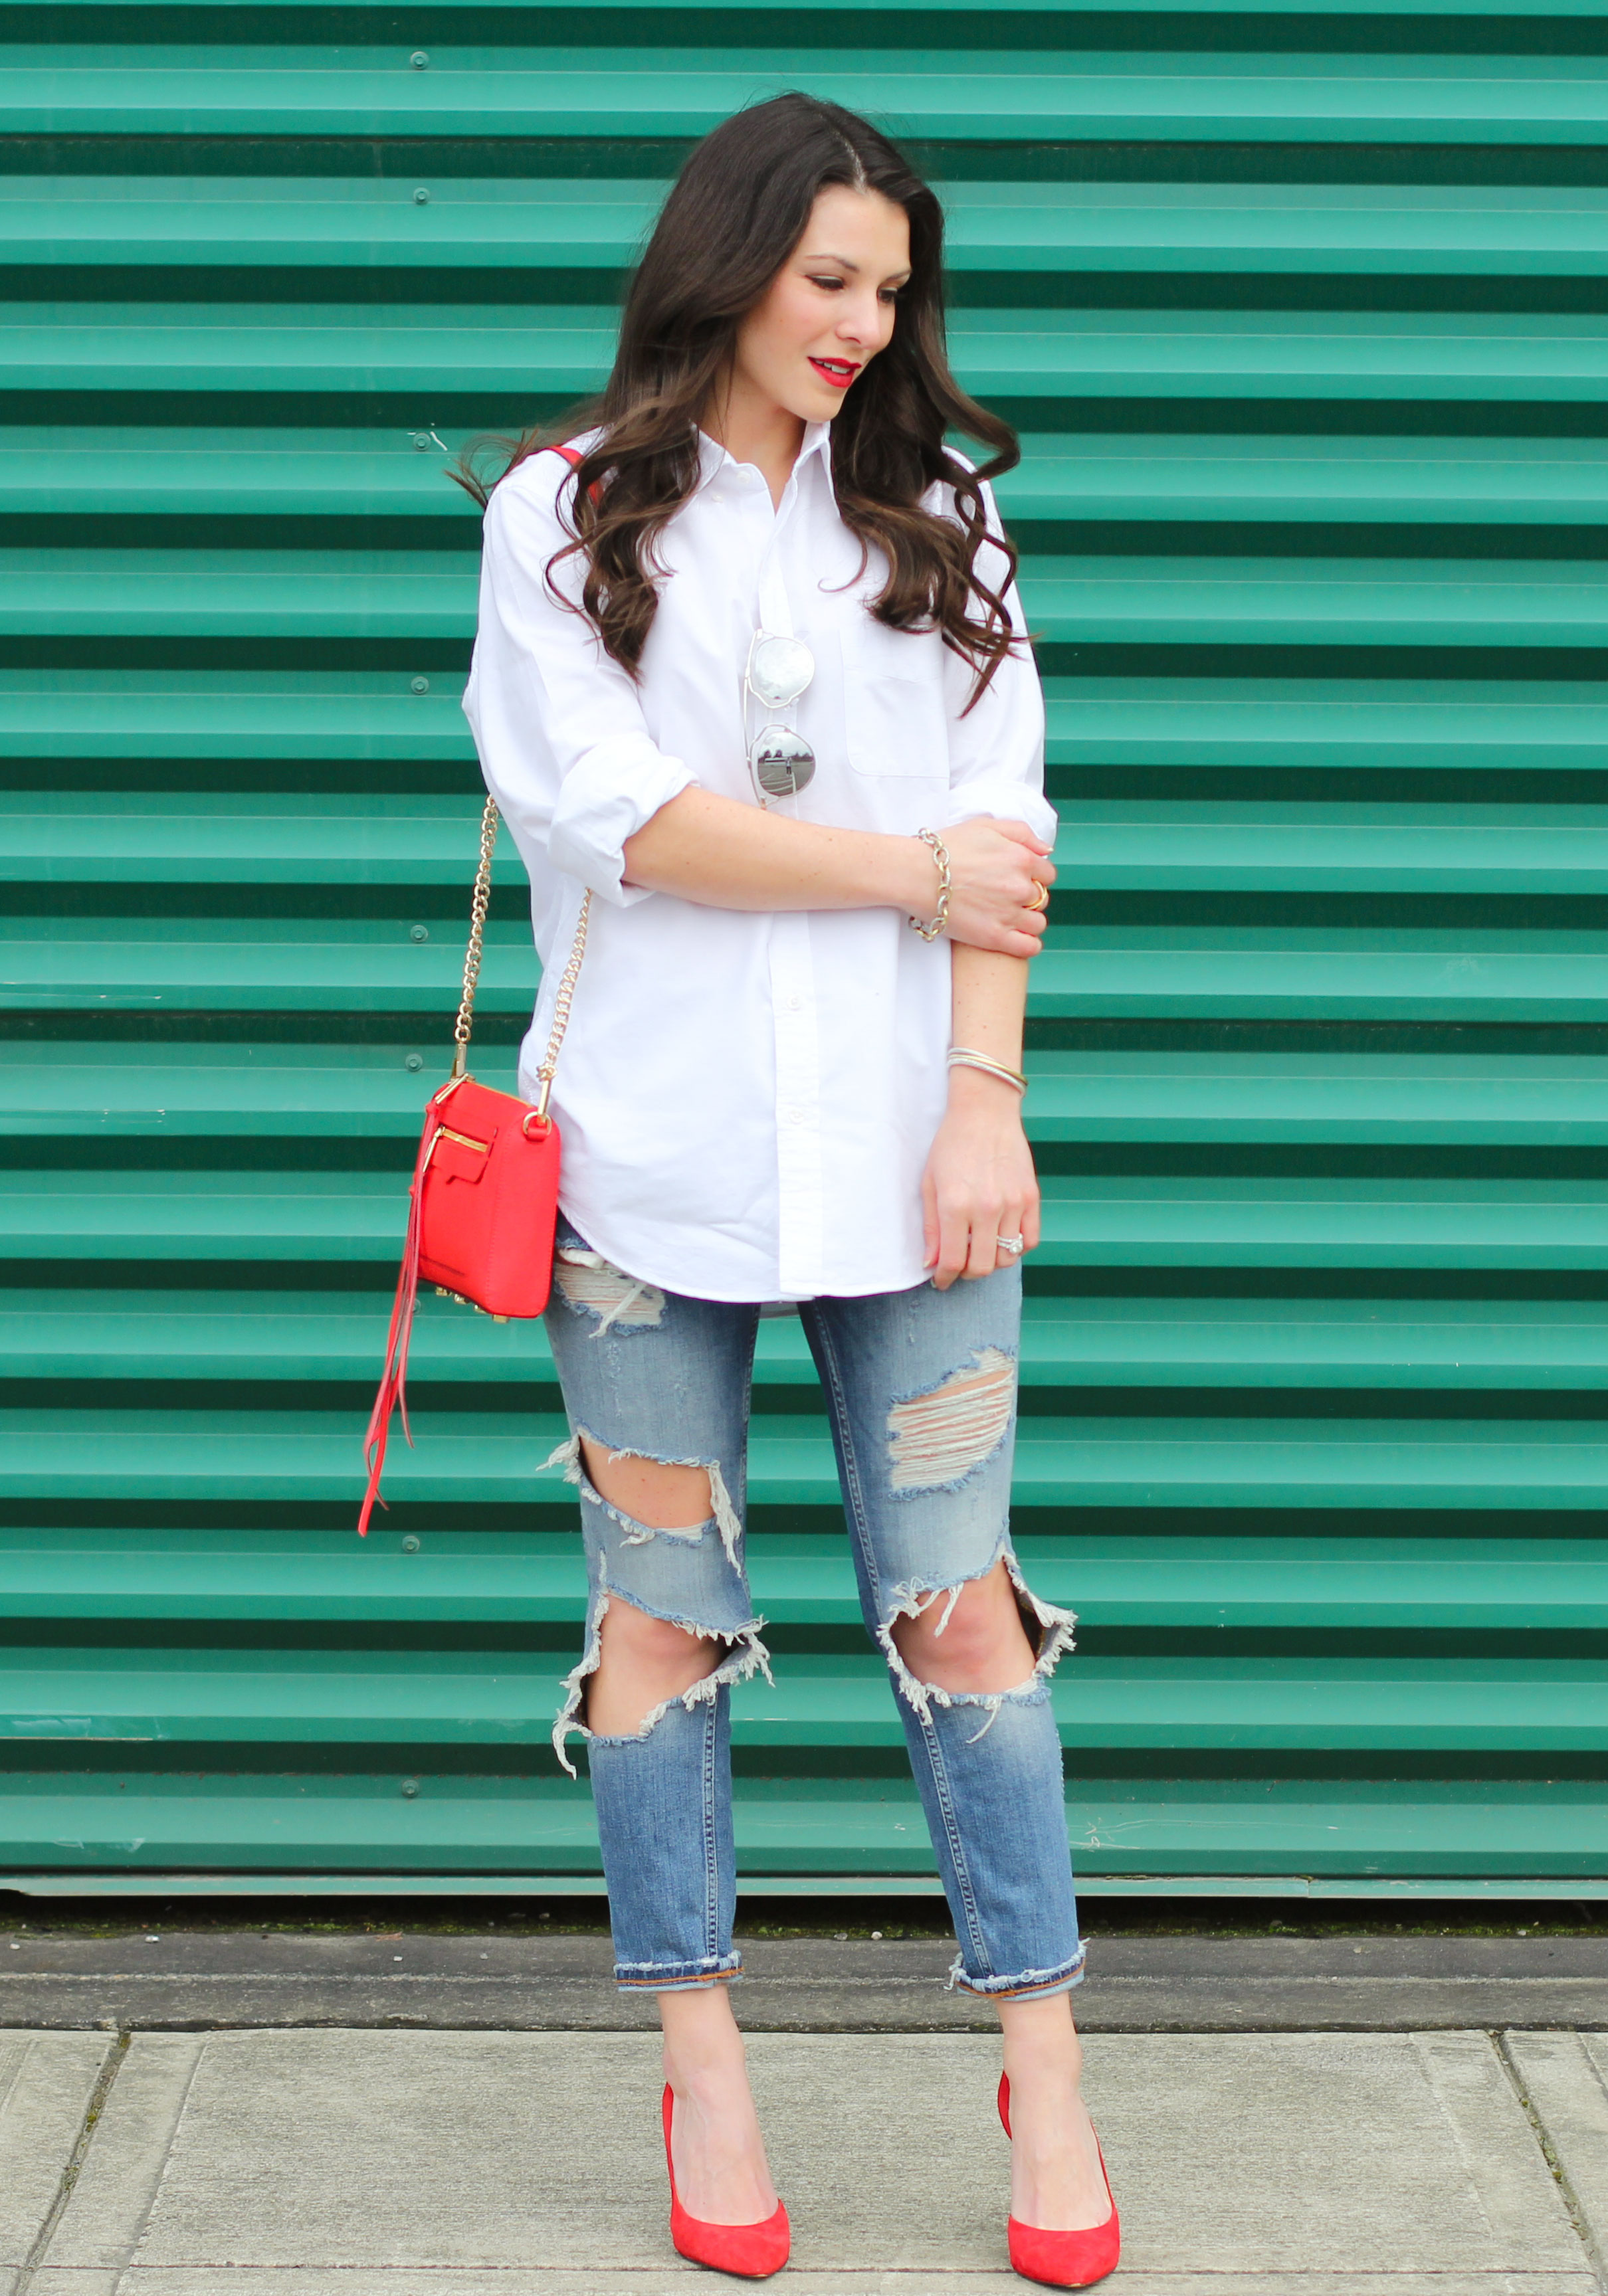 How To Wear Your Boyfriend's White Shirt, Destroyed Jeans, Red Pumps, Rebecca Minkoff Red Avery Crossbody Bag, Dior Replica Sunglasses, Weekend Style, Boyfriend Shirt Outfit